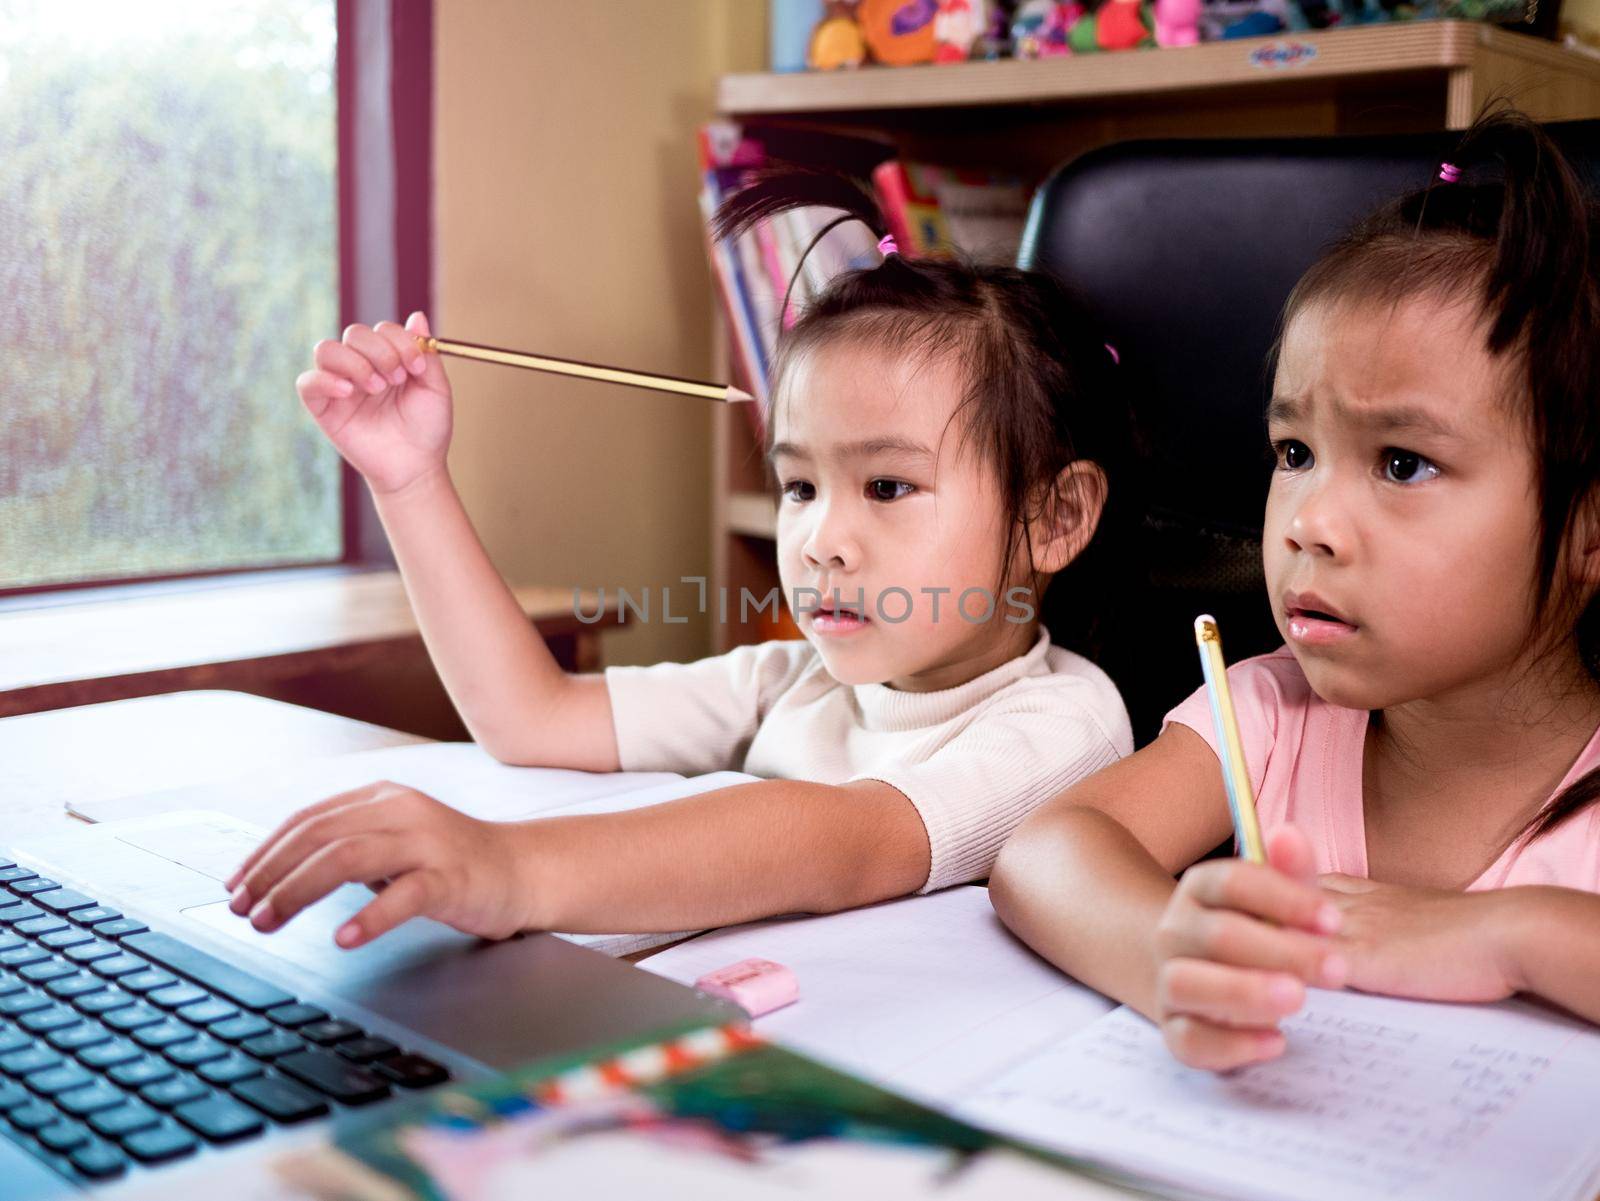 Two little schoolgirls studying homework math during her online lesson at home, social distancing during the coronavirus outbreak. Concept of online education or home schooler.